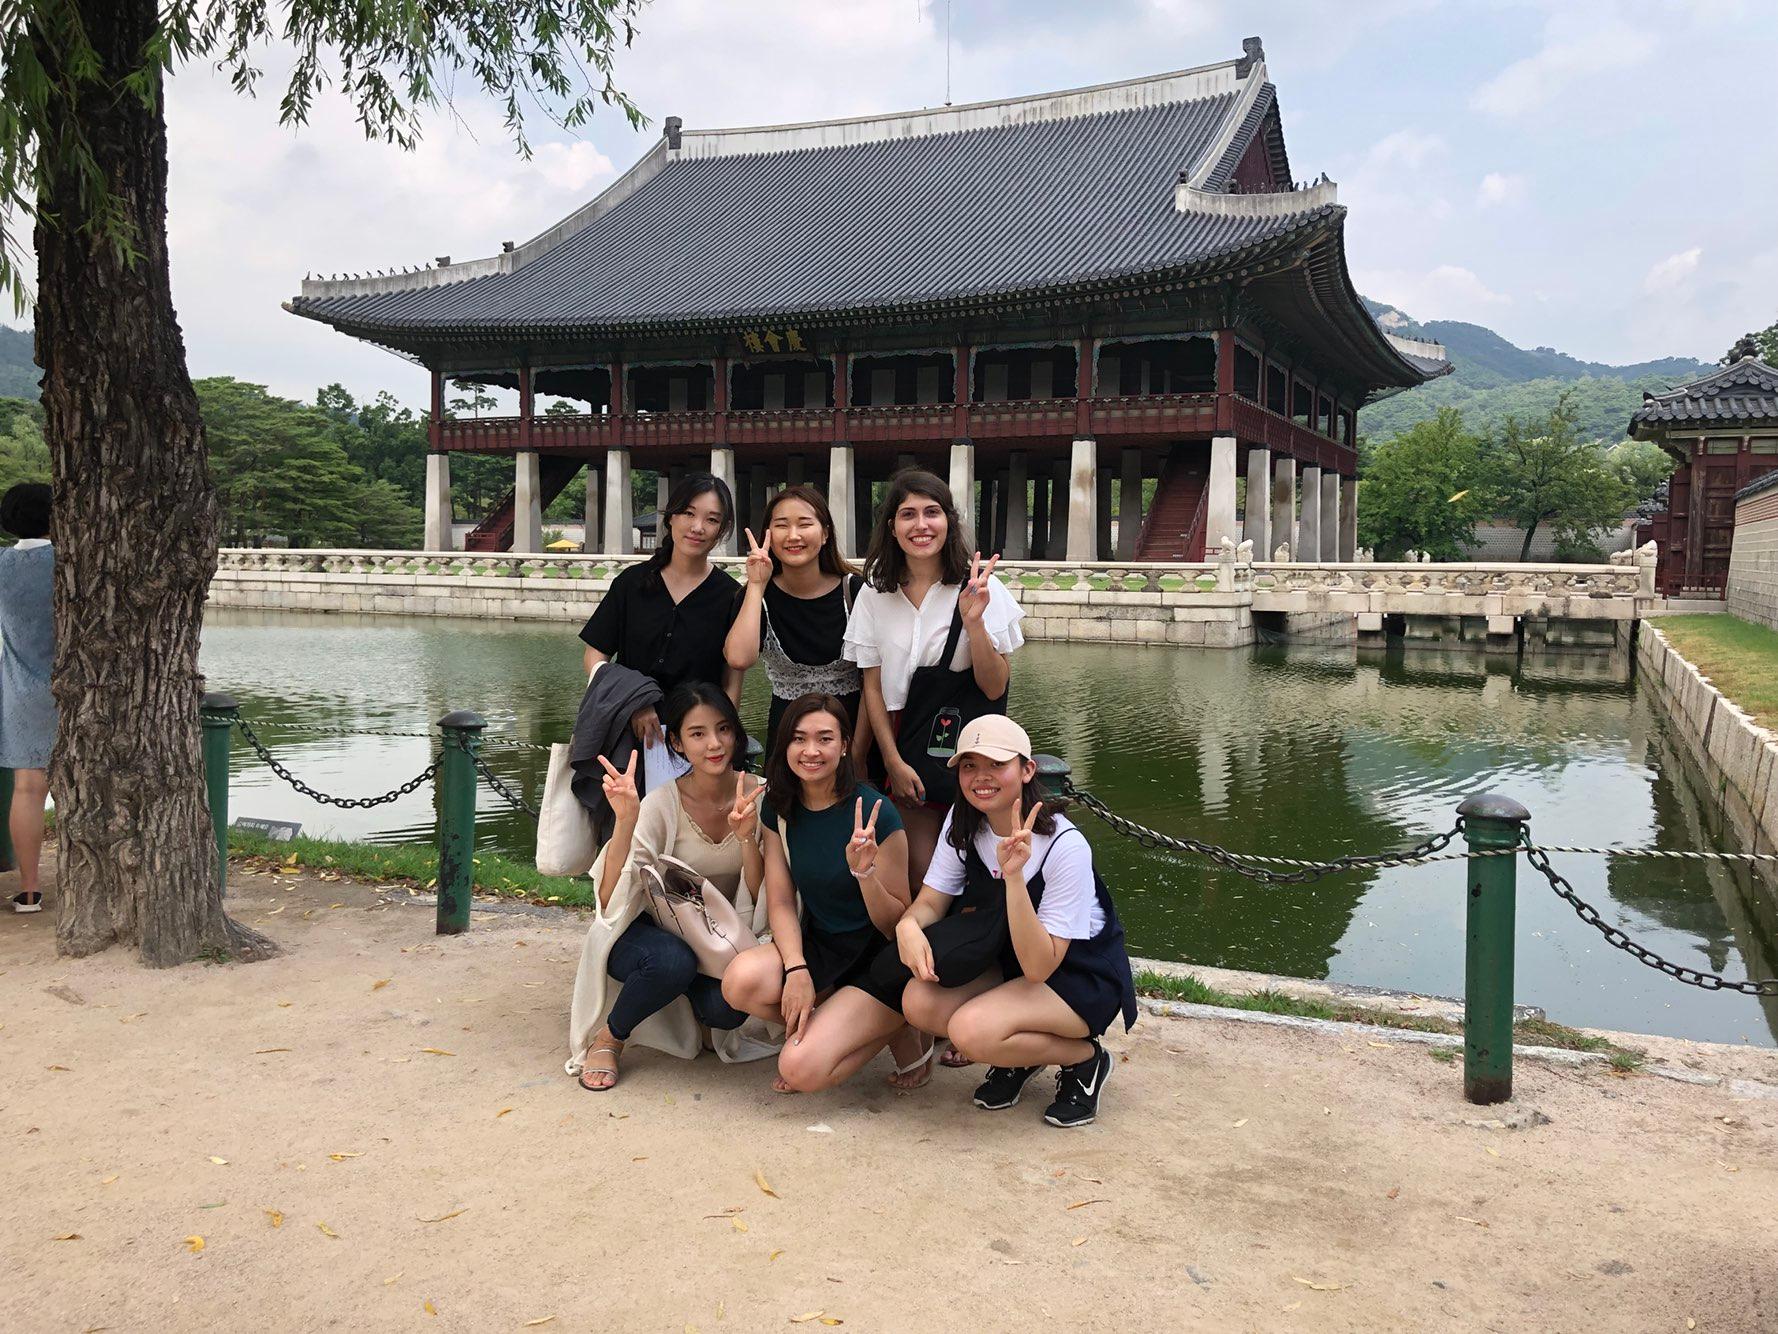 6 students in front of a Chinese pagoda.